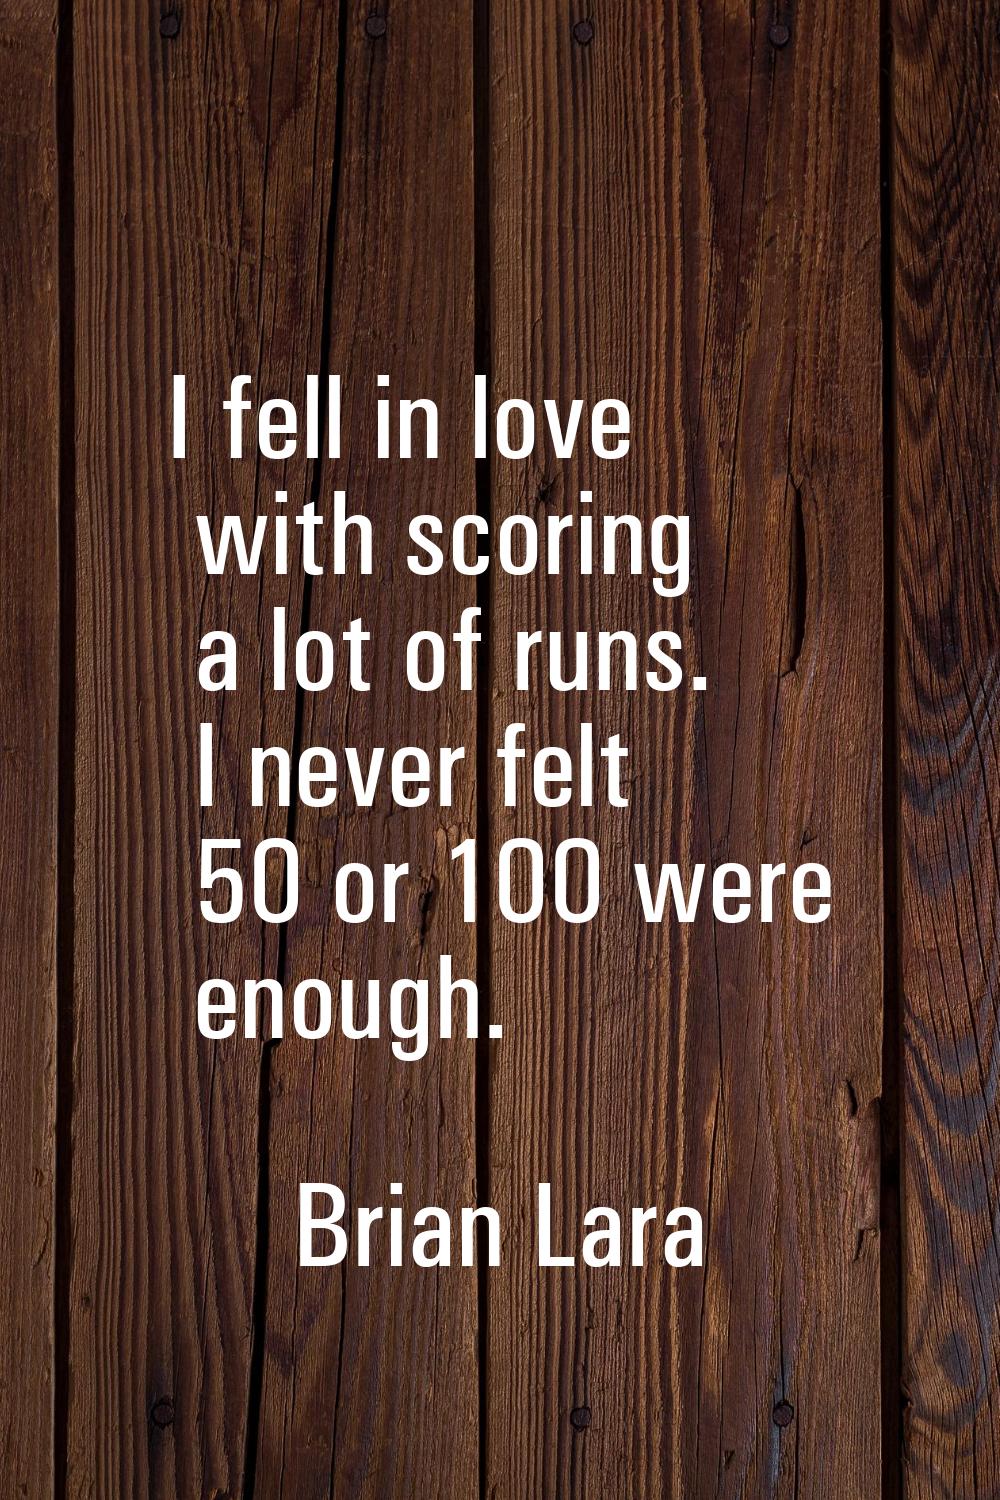 I fell in love with scoring a lot of runs. I never felt 50 or 100 were enough.